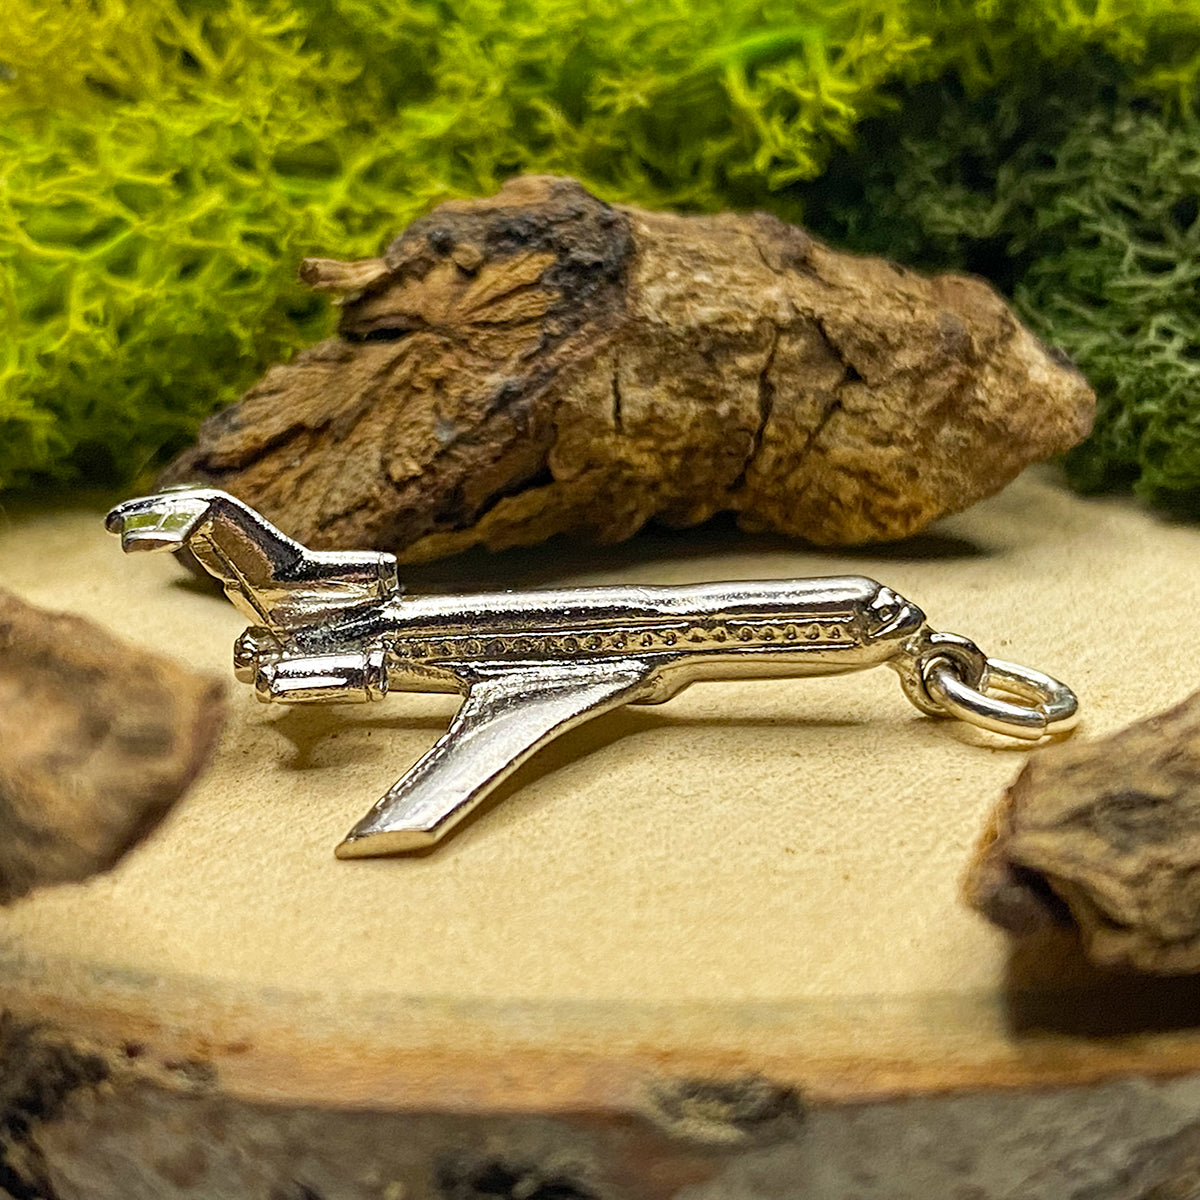 Great Lakes Boutique Wells Silver Airplane Charm